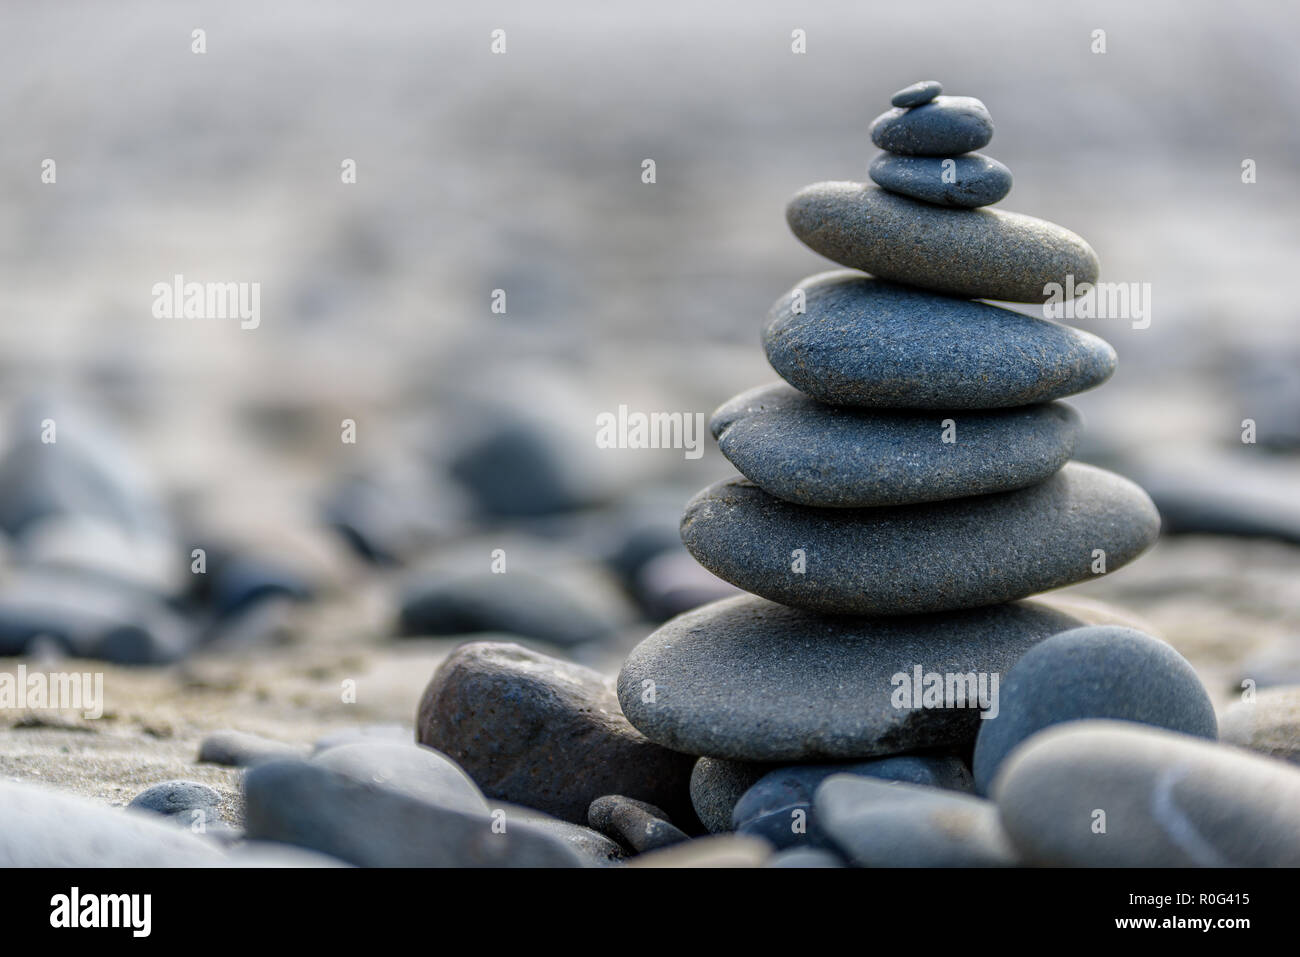 Balance And Wellness Concept Close Up Of Ocean Stones Balanced On Rocks And Ocean Driftwood Low Depth Of Field Zen And Spa Inspired Stock Photo Alamy